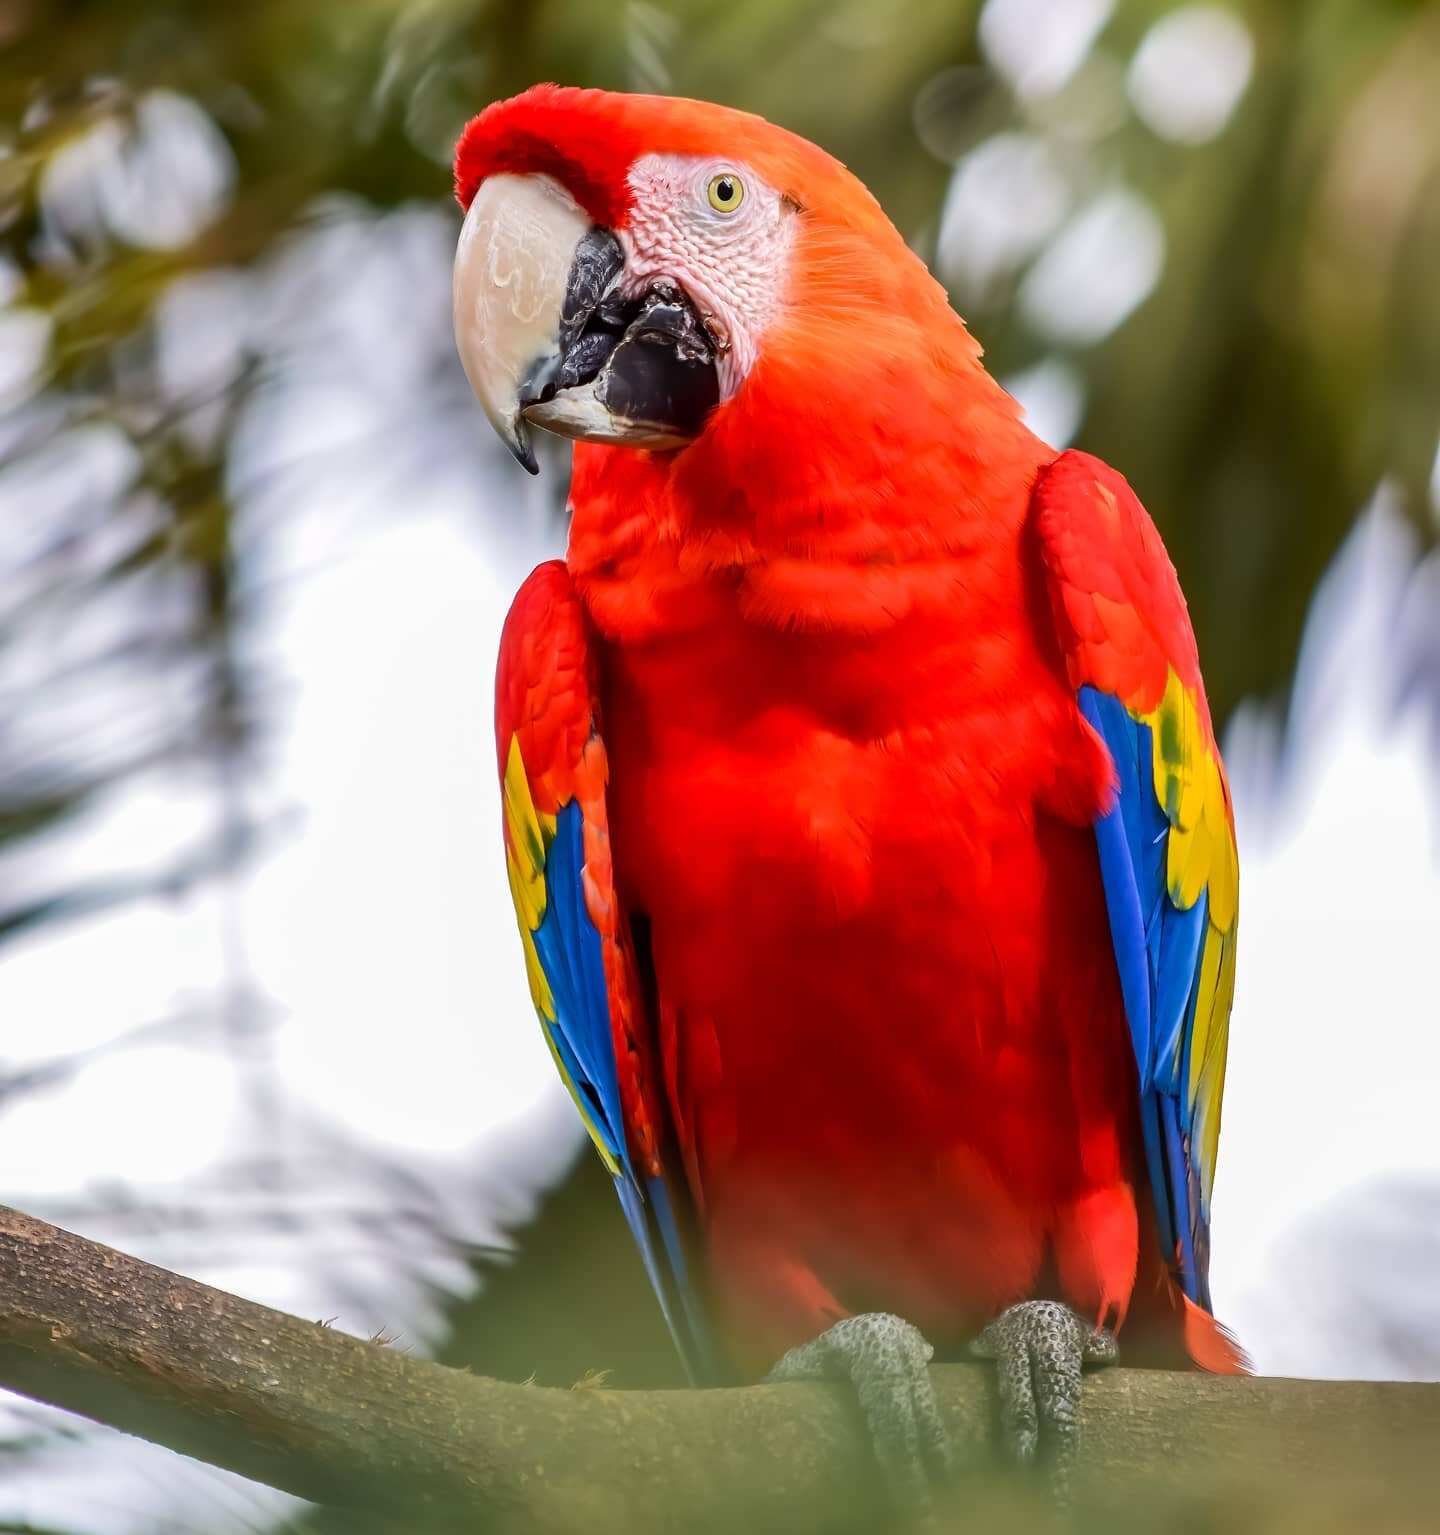 We are extremely lucky to house the largest parrots in the world on our very doorstep. The Scarlett Macaw can be as long as 33 inches and is native to Central and South America. Its distinct call and bright rainbow coat ensures you won't miss them, w